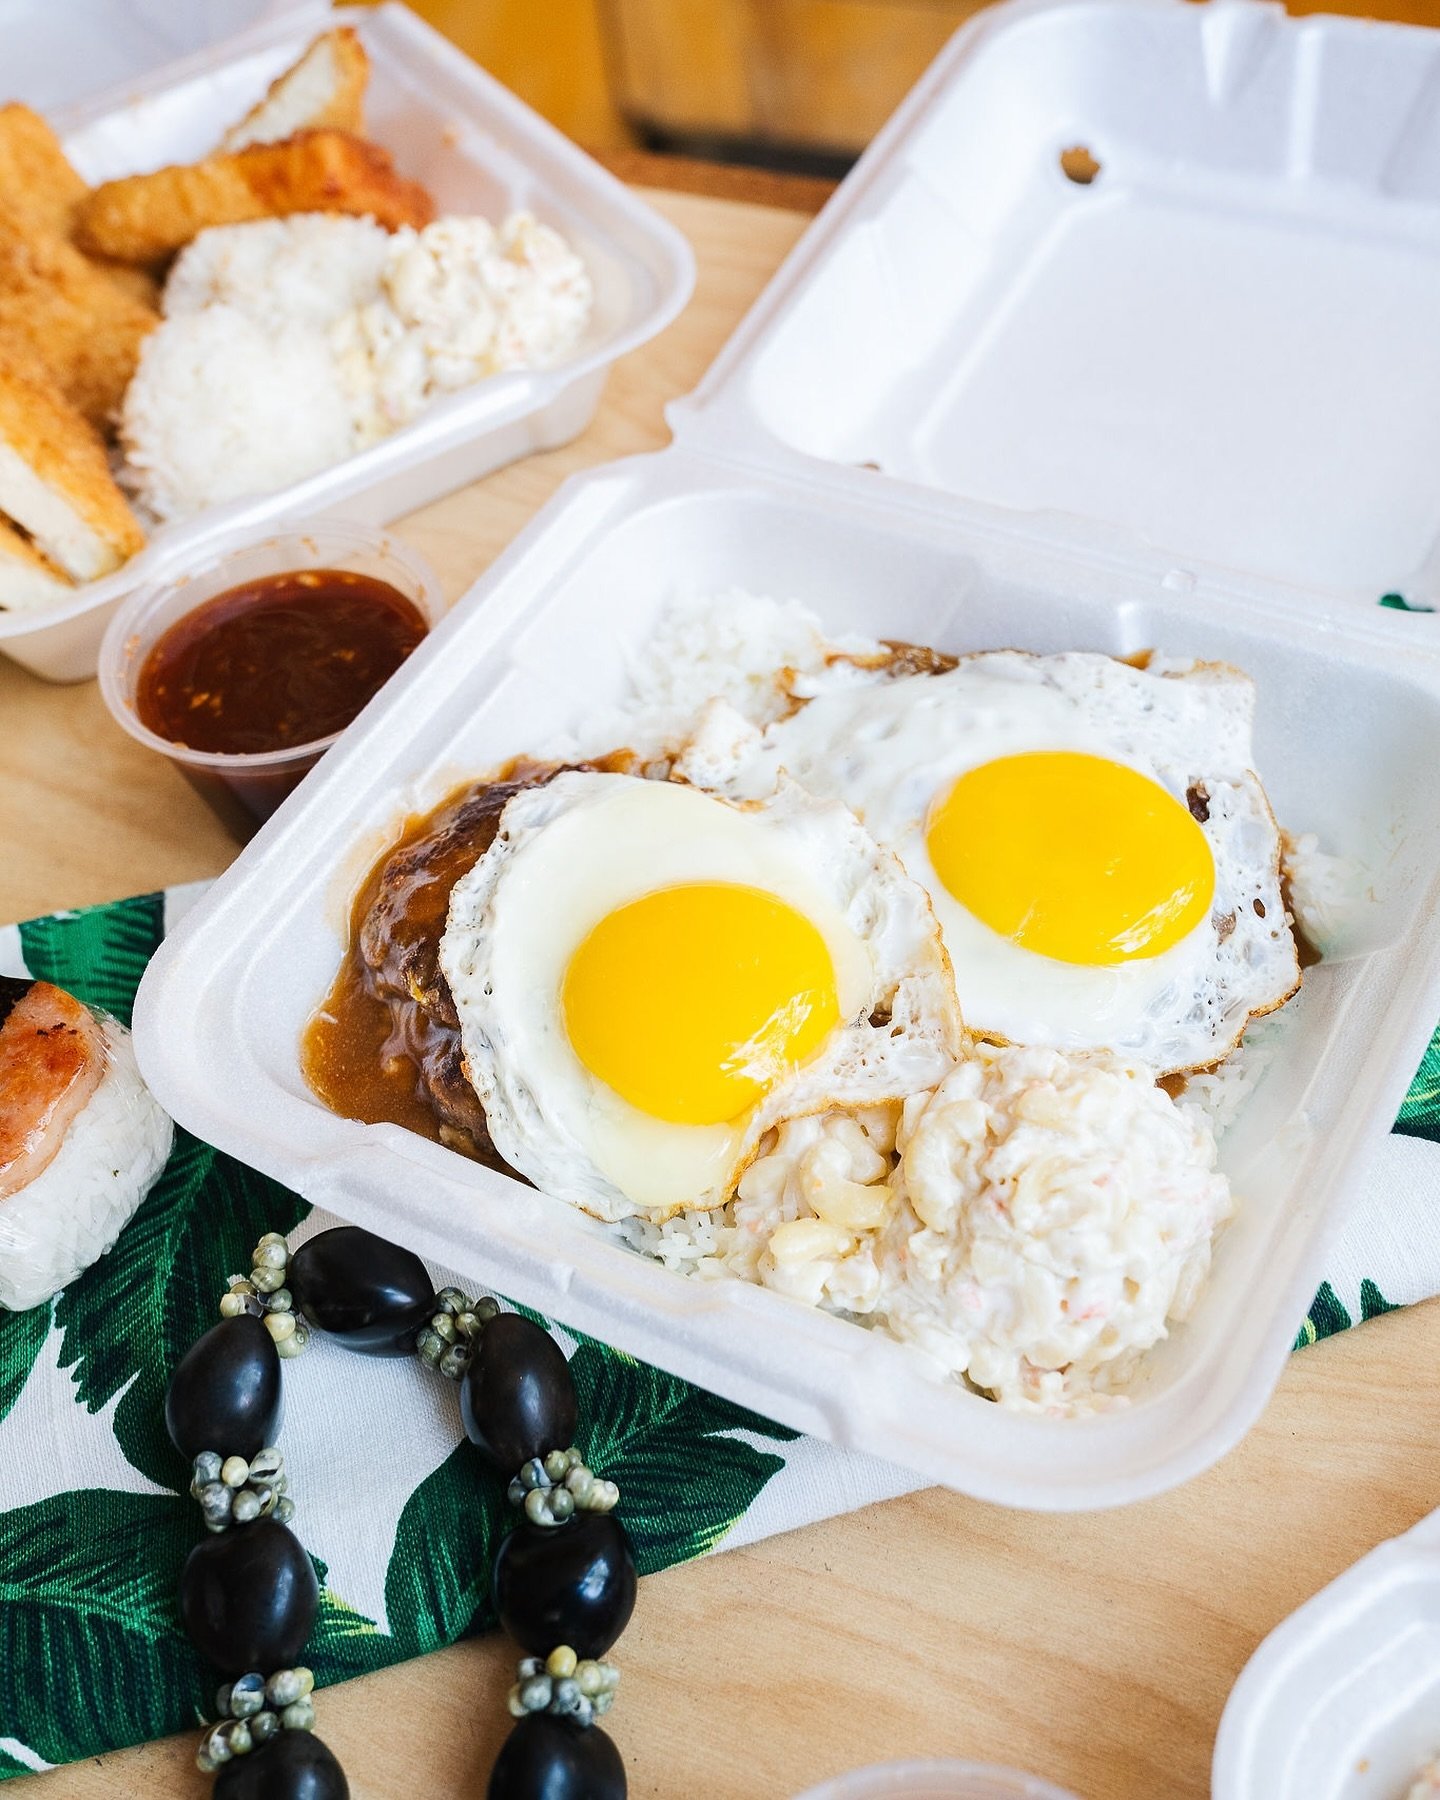 A perfect day for some plate lunch 😌how about some Loco Moco? 🍳#AlohaEats #chicagofood #yelpchicago #eaterchicago